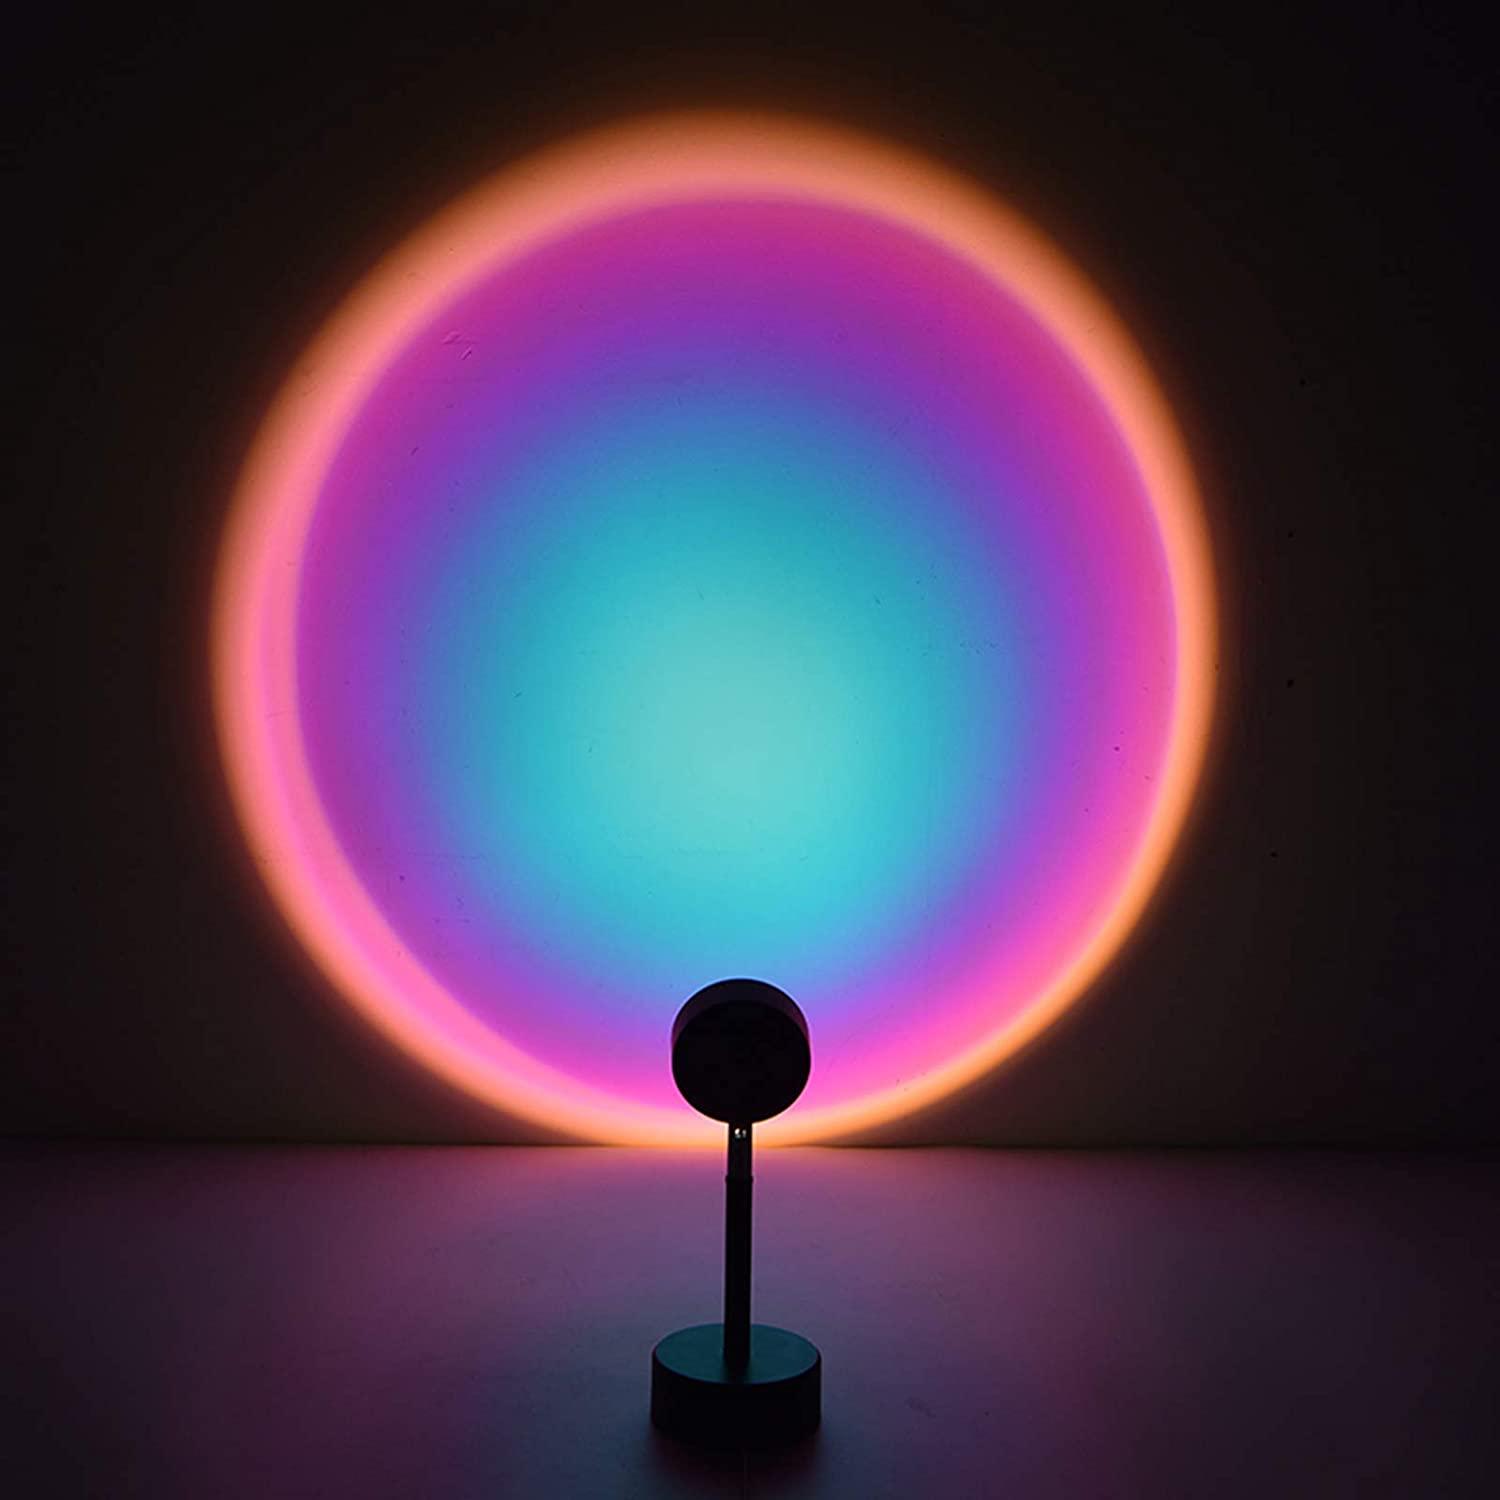 16 Colors Sunset Lamp Projector 360 Degree Rotation Color Changing Rainbow Projection Light Romantic Visual LED Light - If you say i do